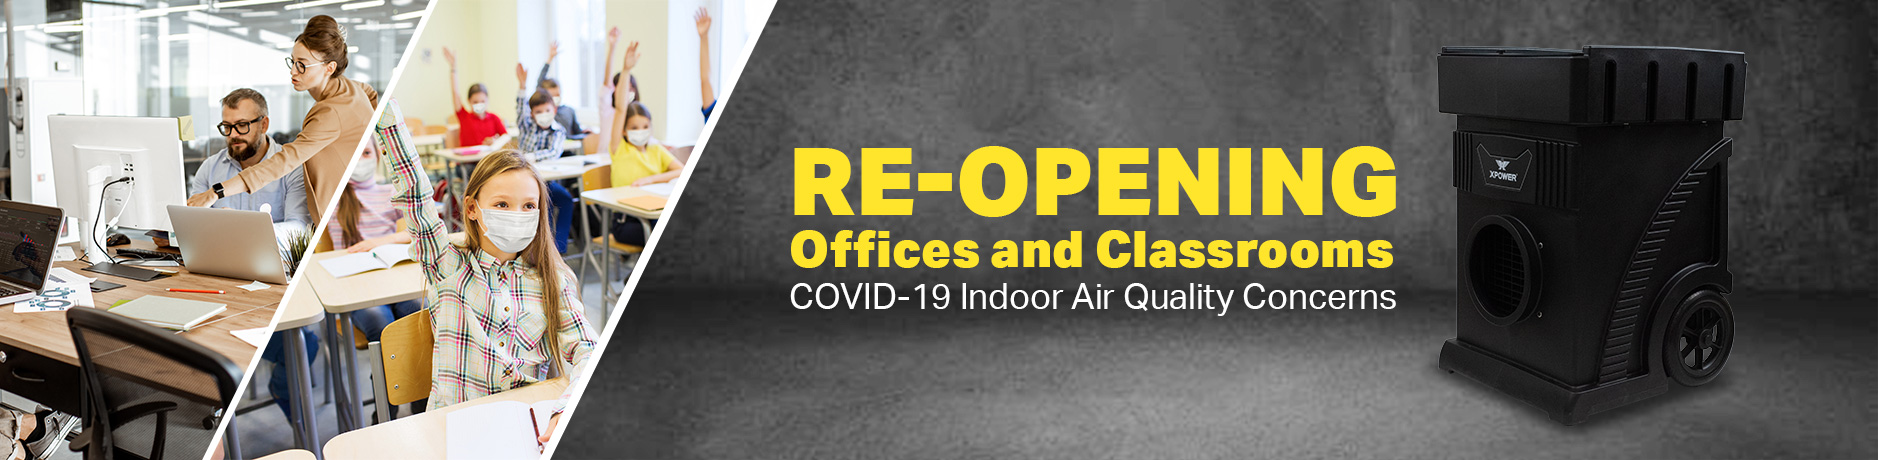 Re-Opening Offices and Classrooms COVID-19 Indoor Air Quality